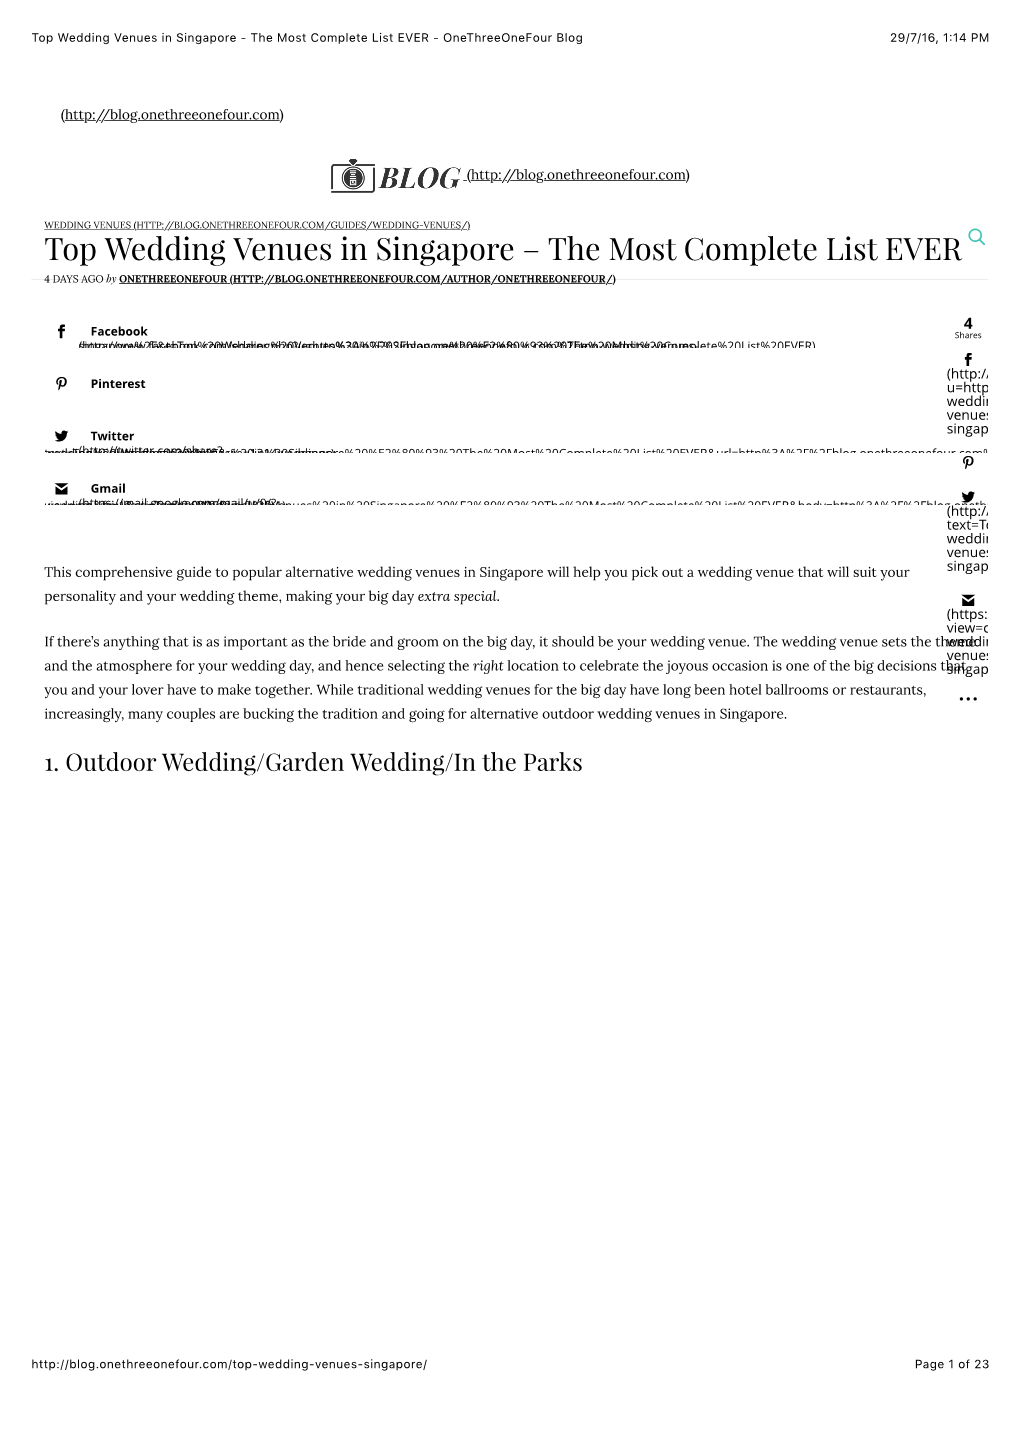 Top Wedding Venues in Singapore - the Most Complete List EVER - Onethreeonefour Blog 29/7/16, 1:14 PM